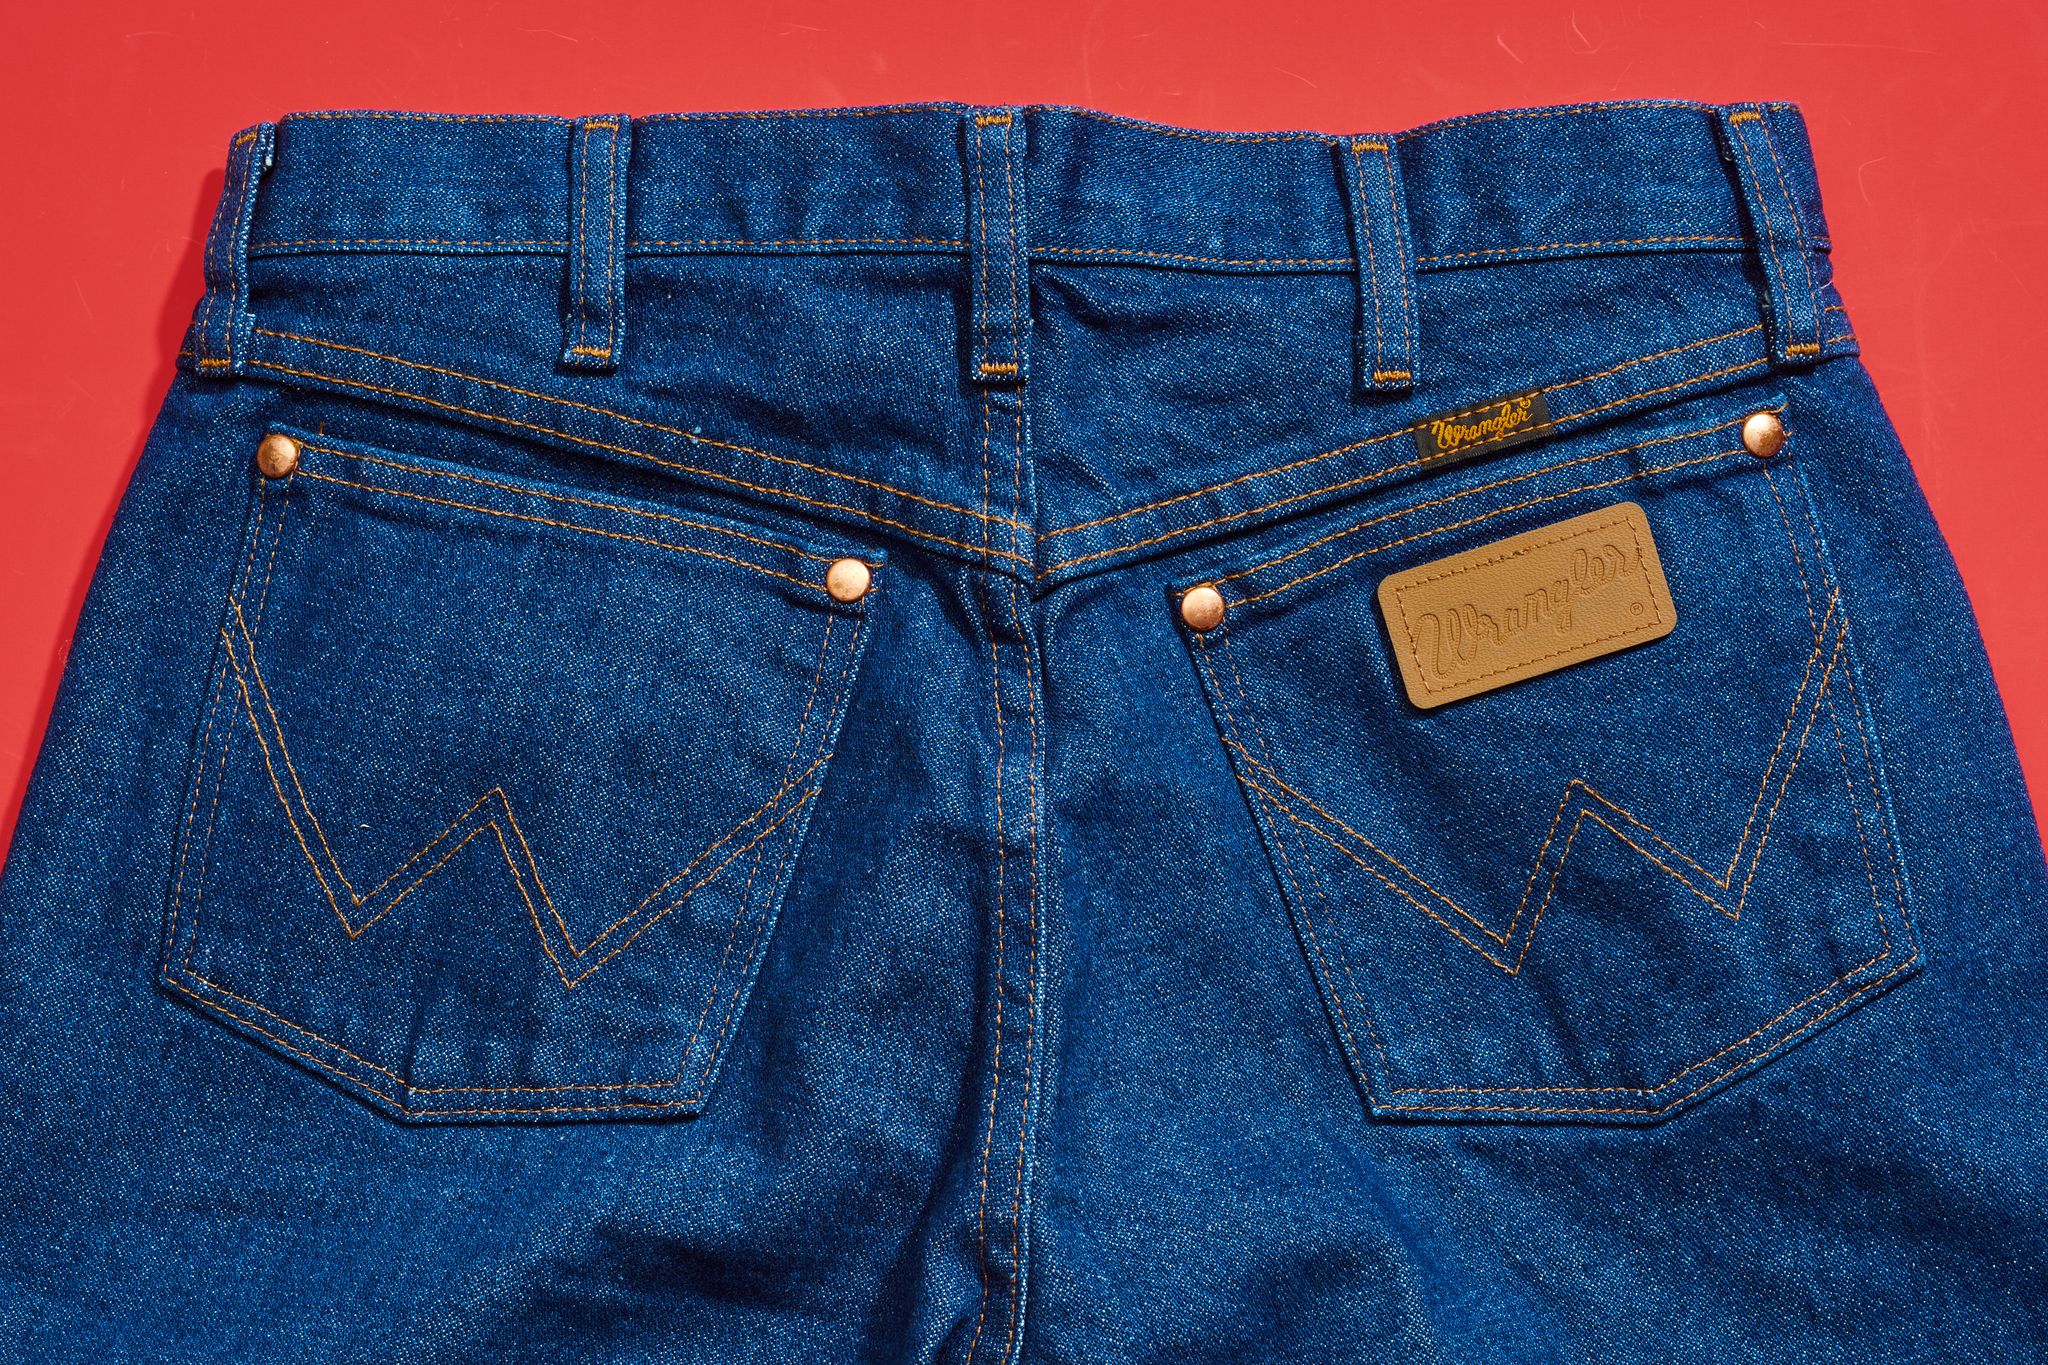 Wrangler Jeans Review: Why I'll Never Need Another Pair of Jeans